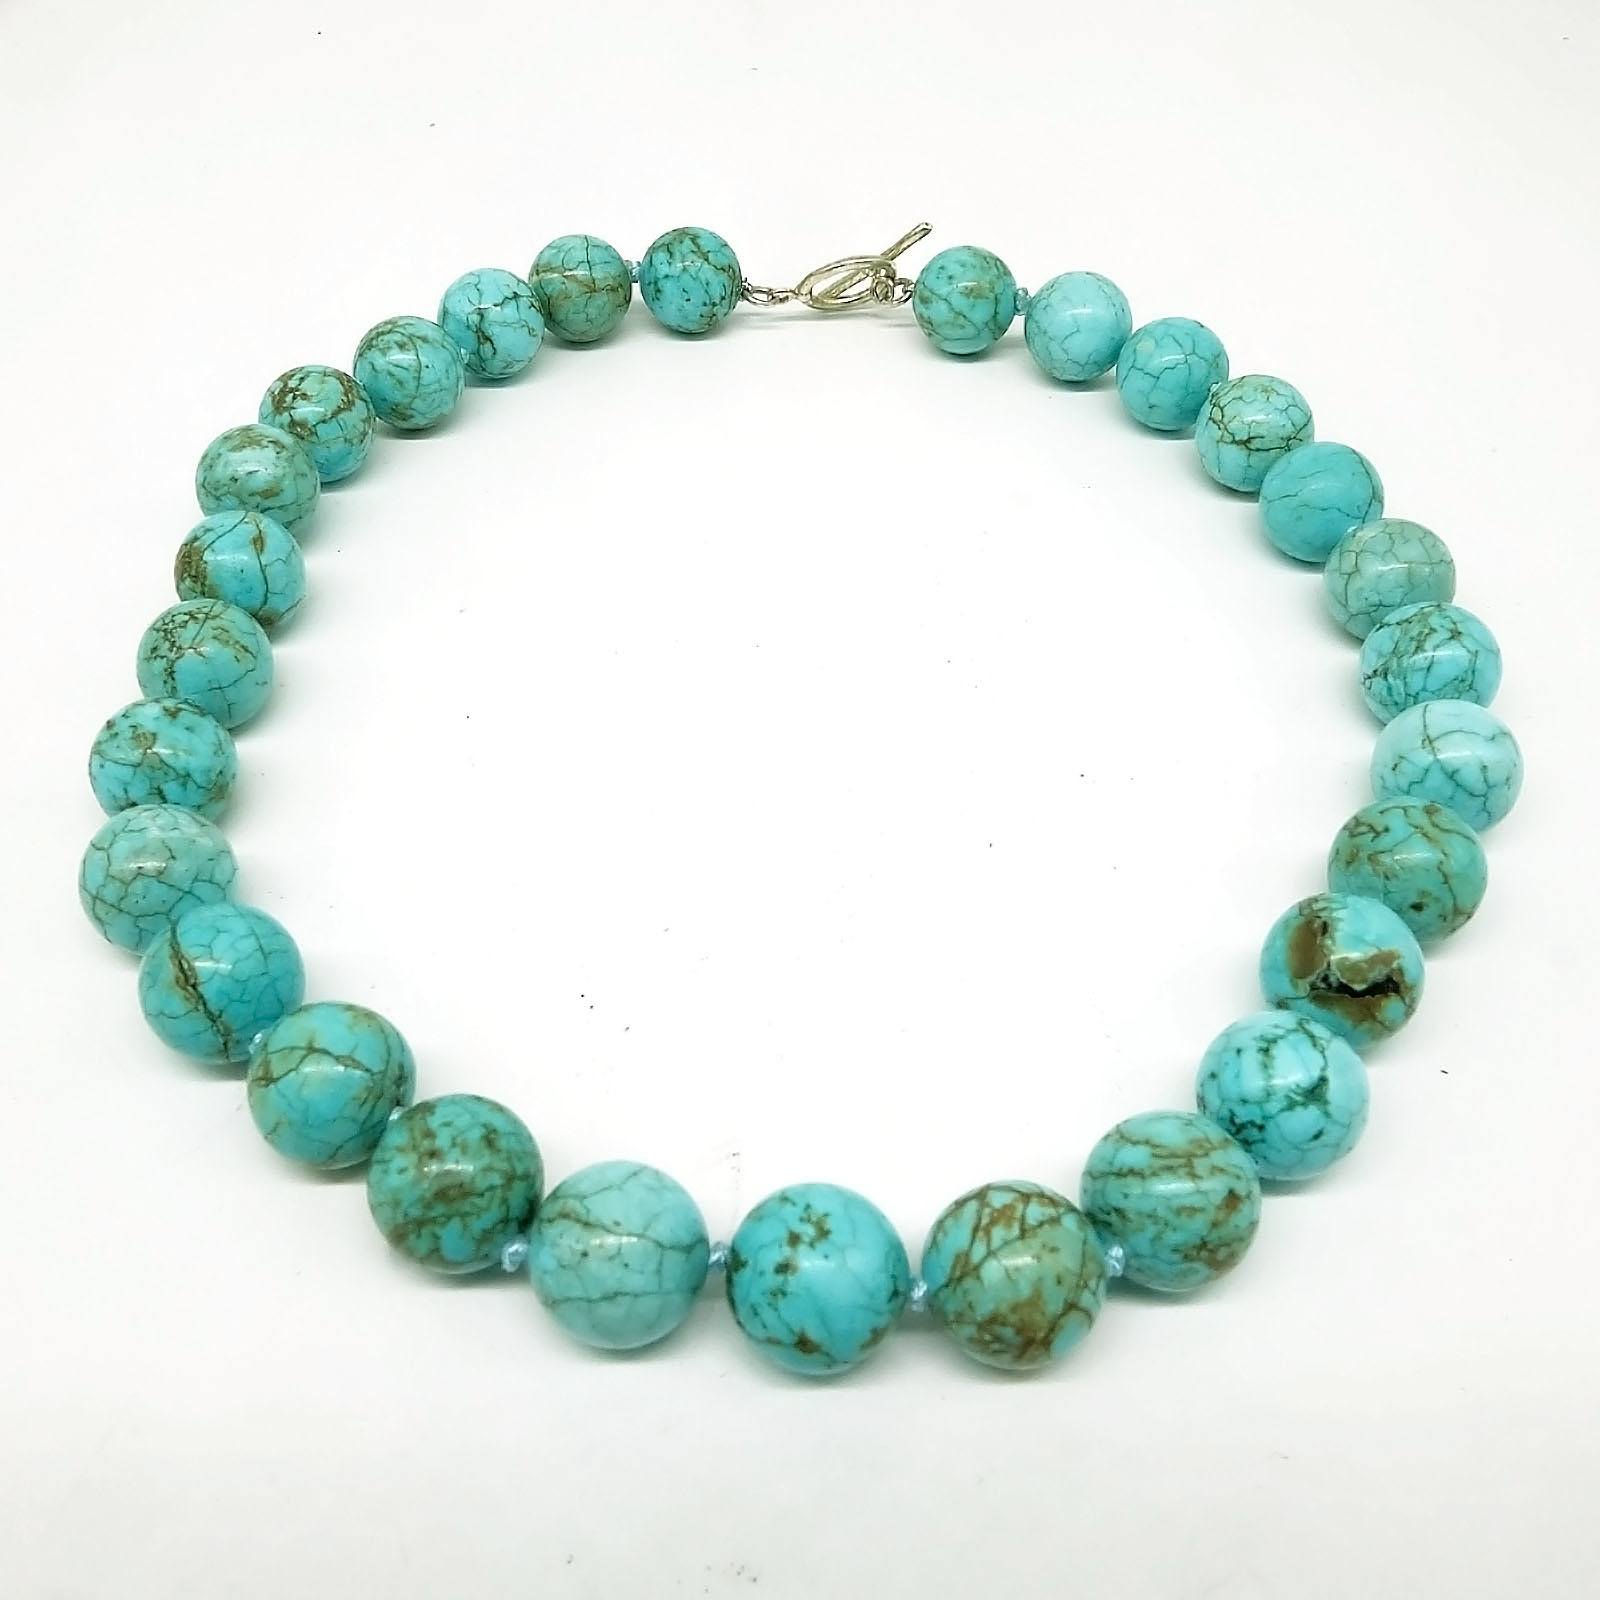 'Turquoise Necklace 14mm Round Green Blue Beads '